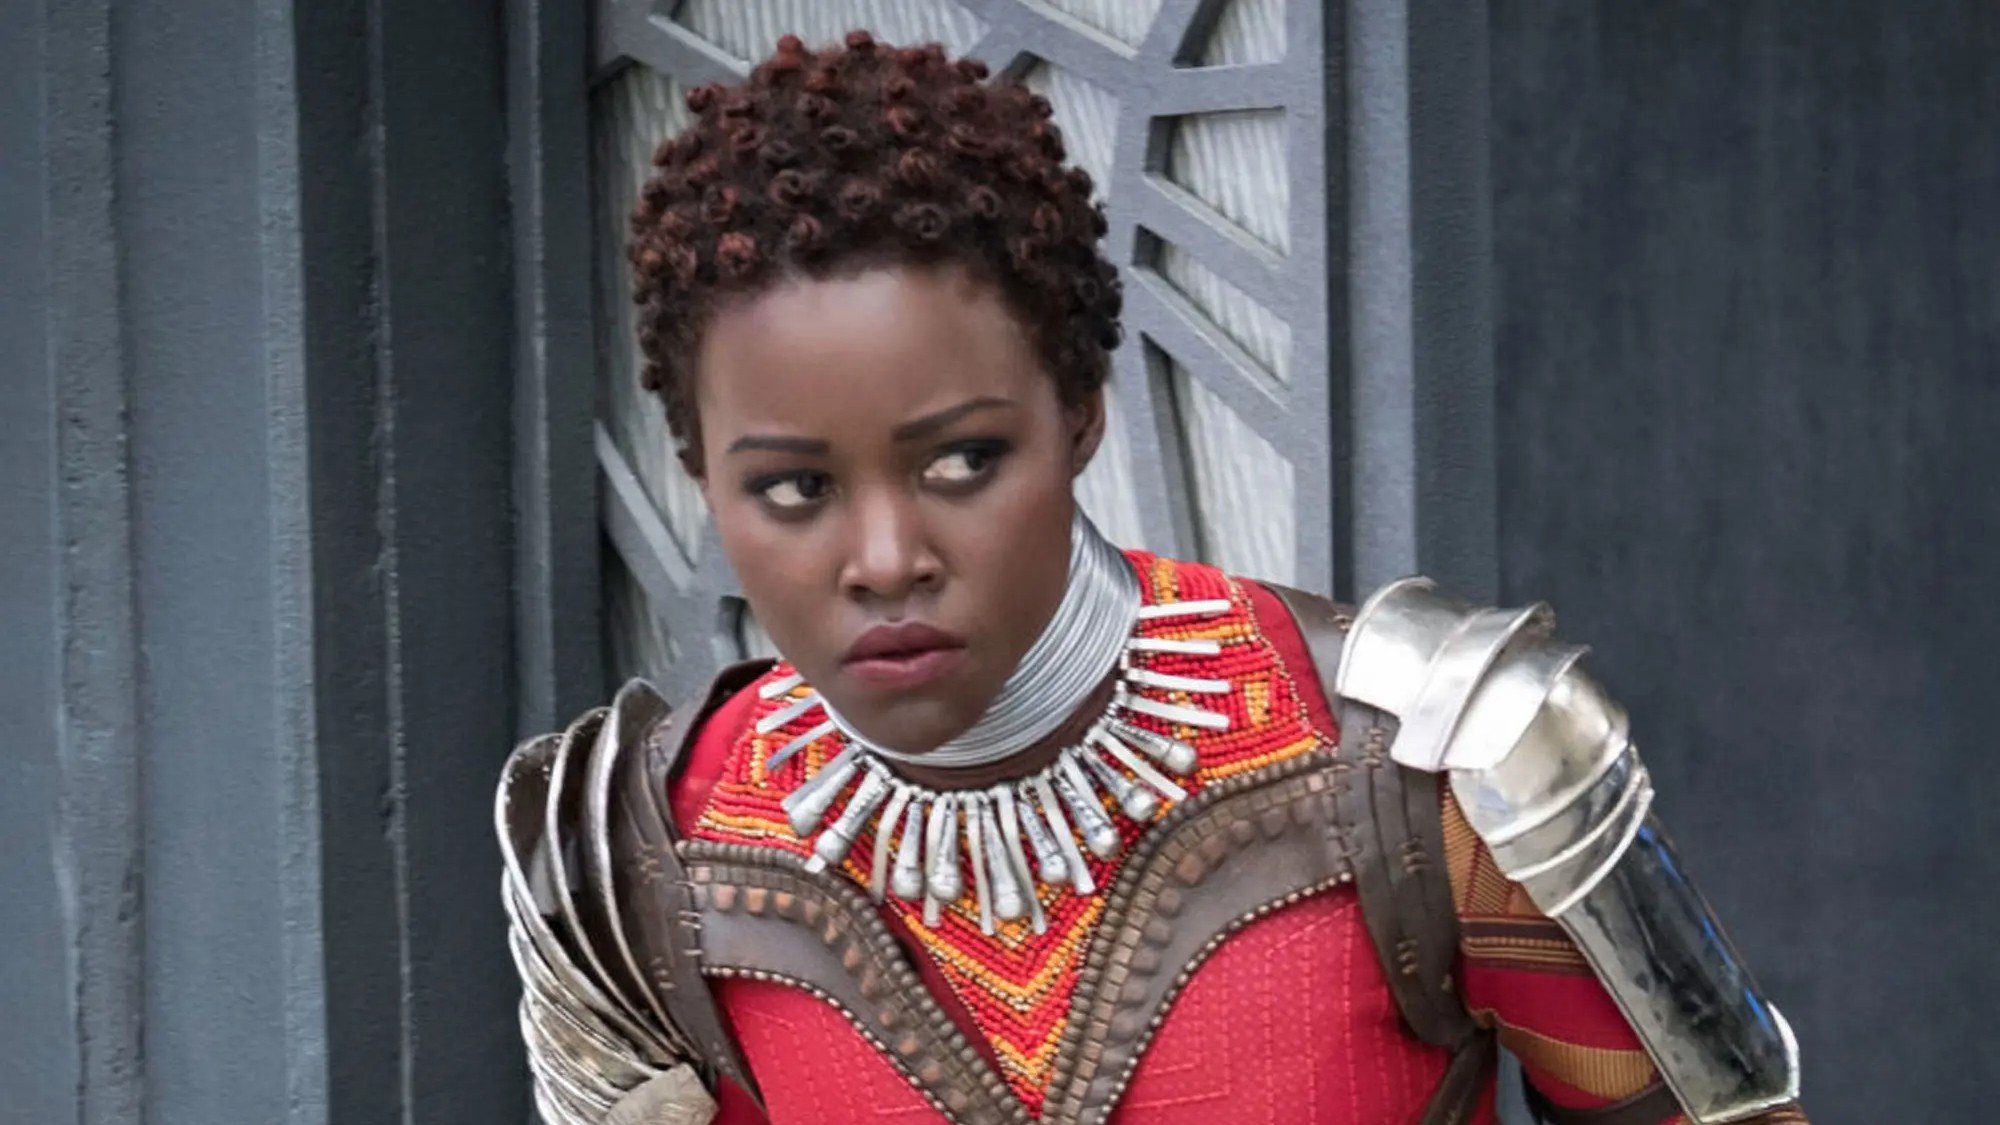 Casts Of Wakanda Forever Was 'Inspired By Africa'